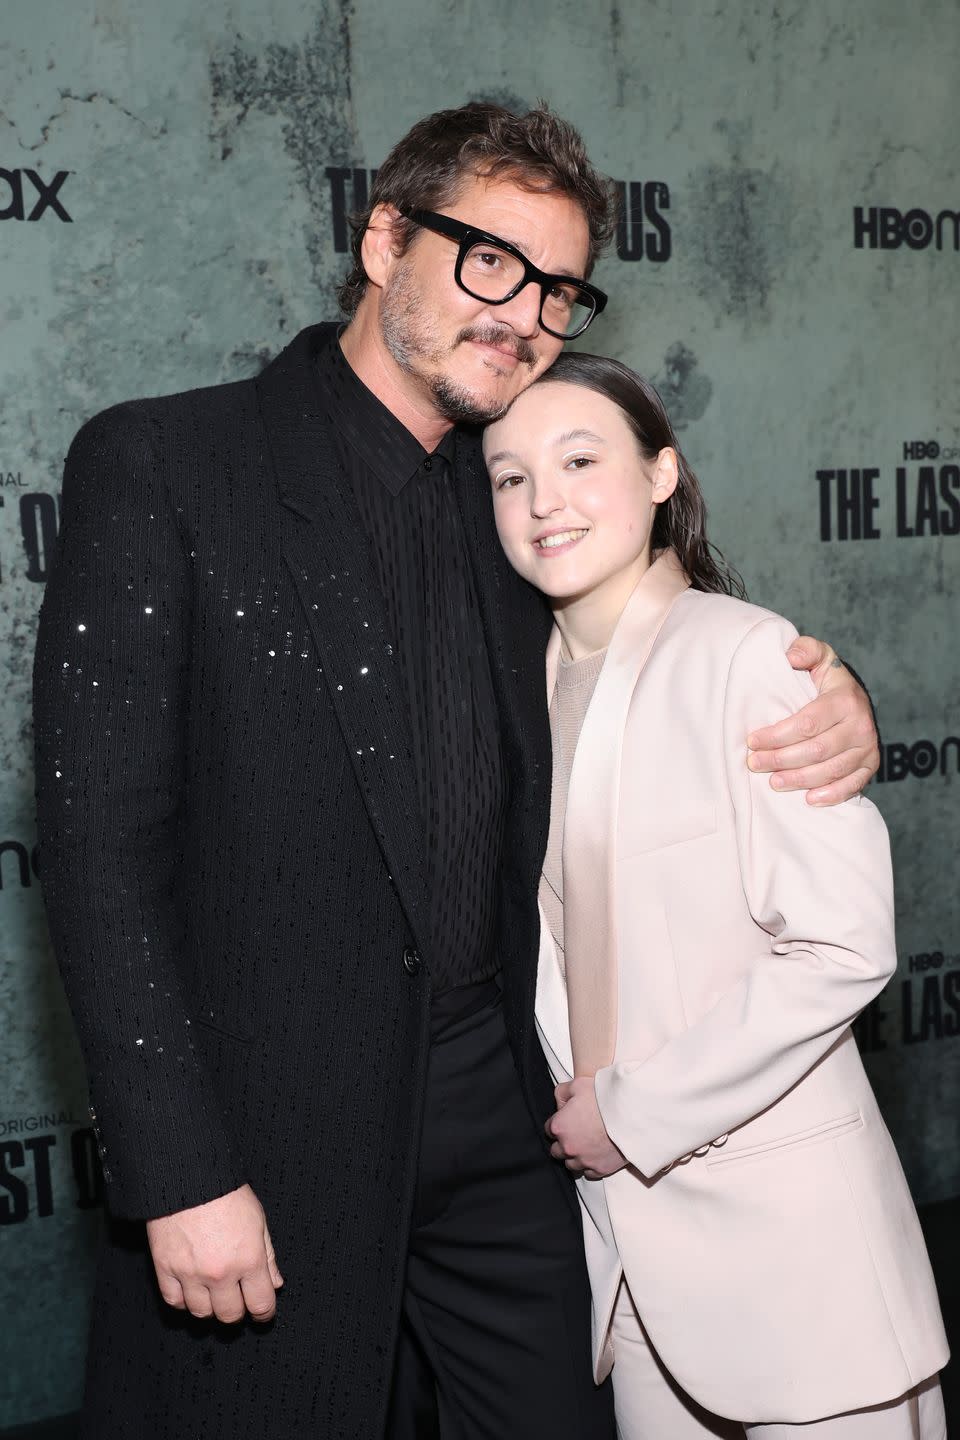 'the last of us' cast members pedro pascal and bella ramsey on instagram